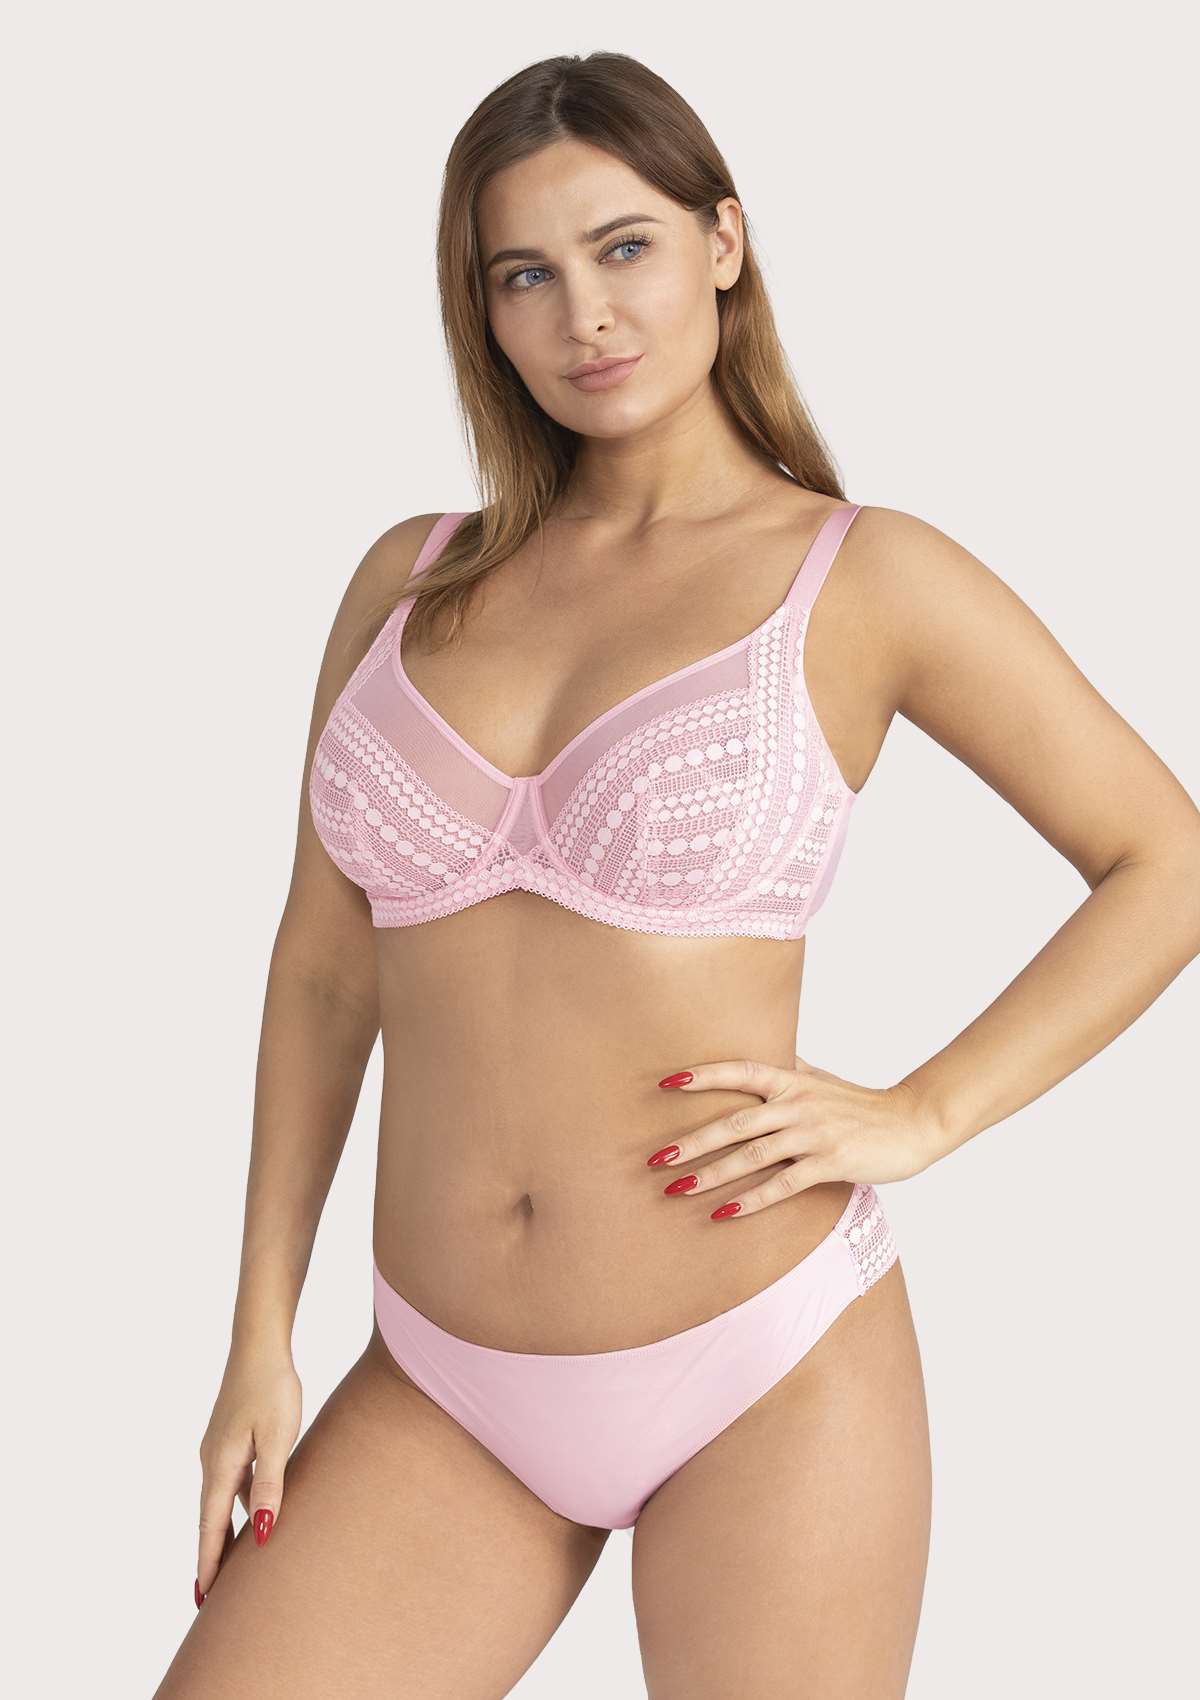 HSIA Heroine Lace Bra And Panties Set: Most Comfortable Supportive Bra - Pink / 34 / C